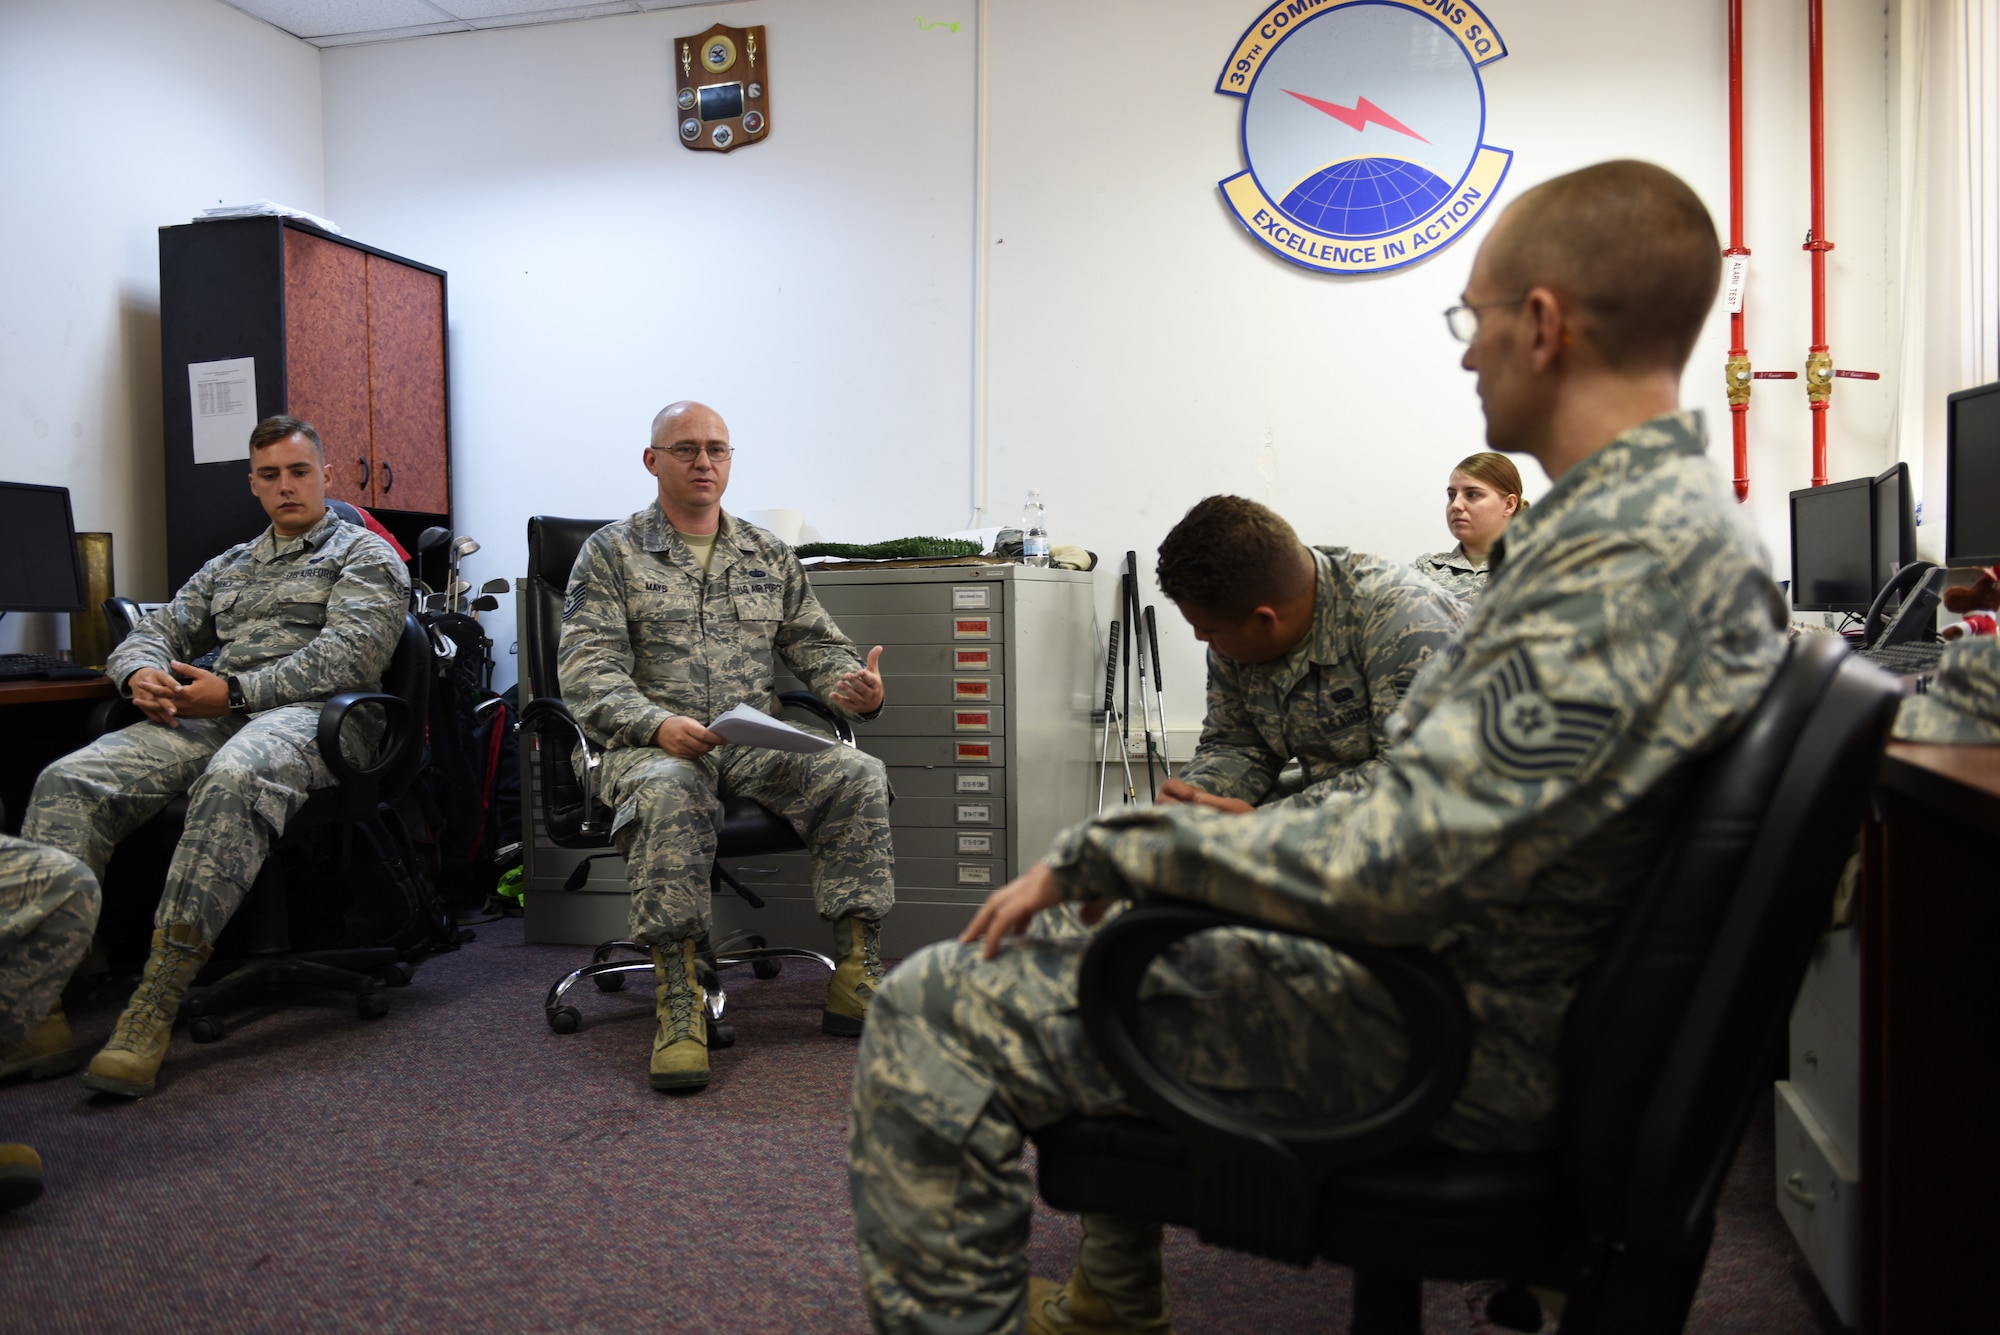 Members of the communication squadron brief each other on safety in the workplace.